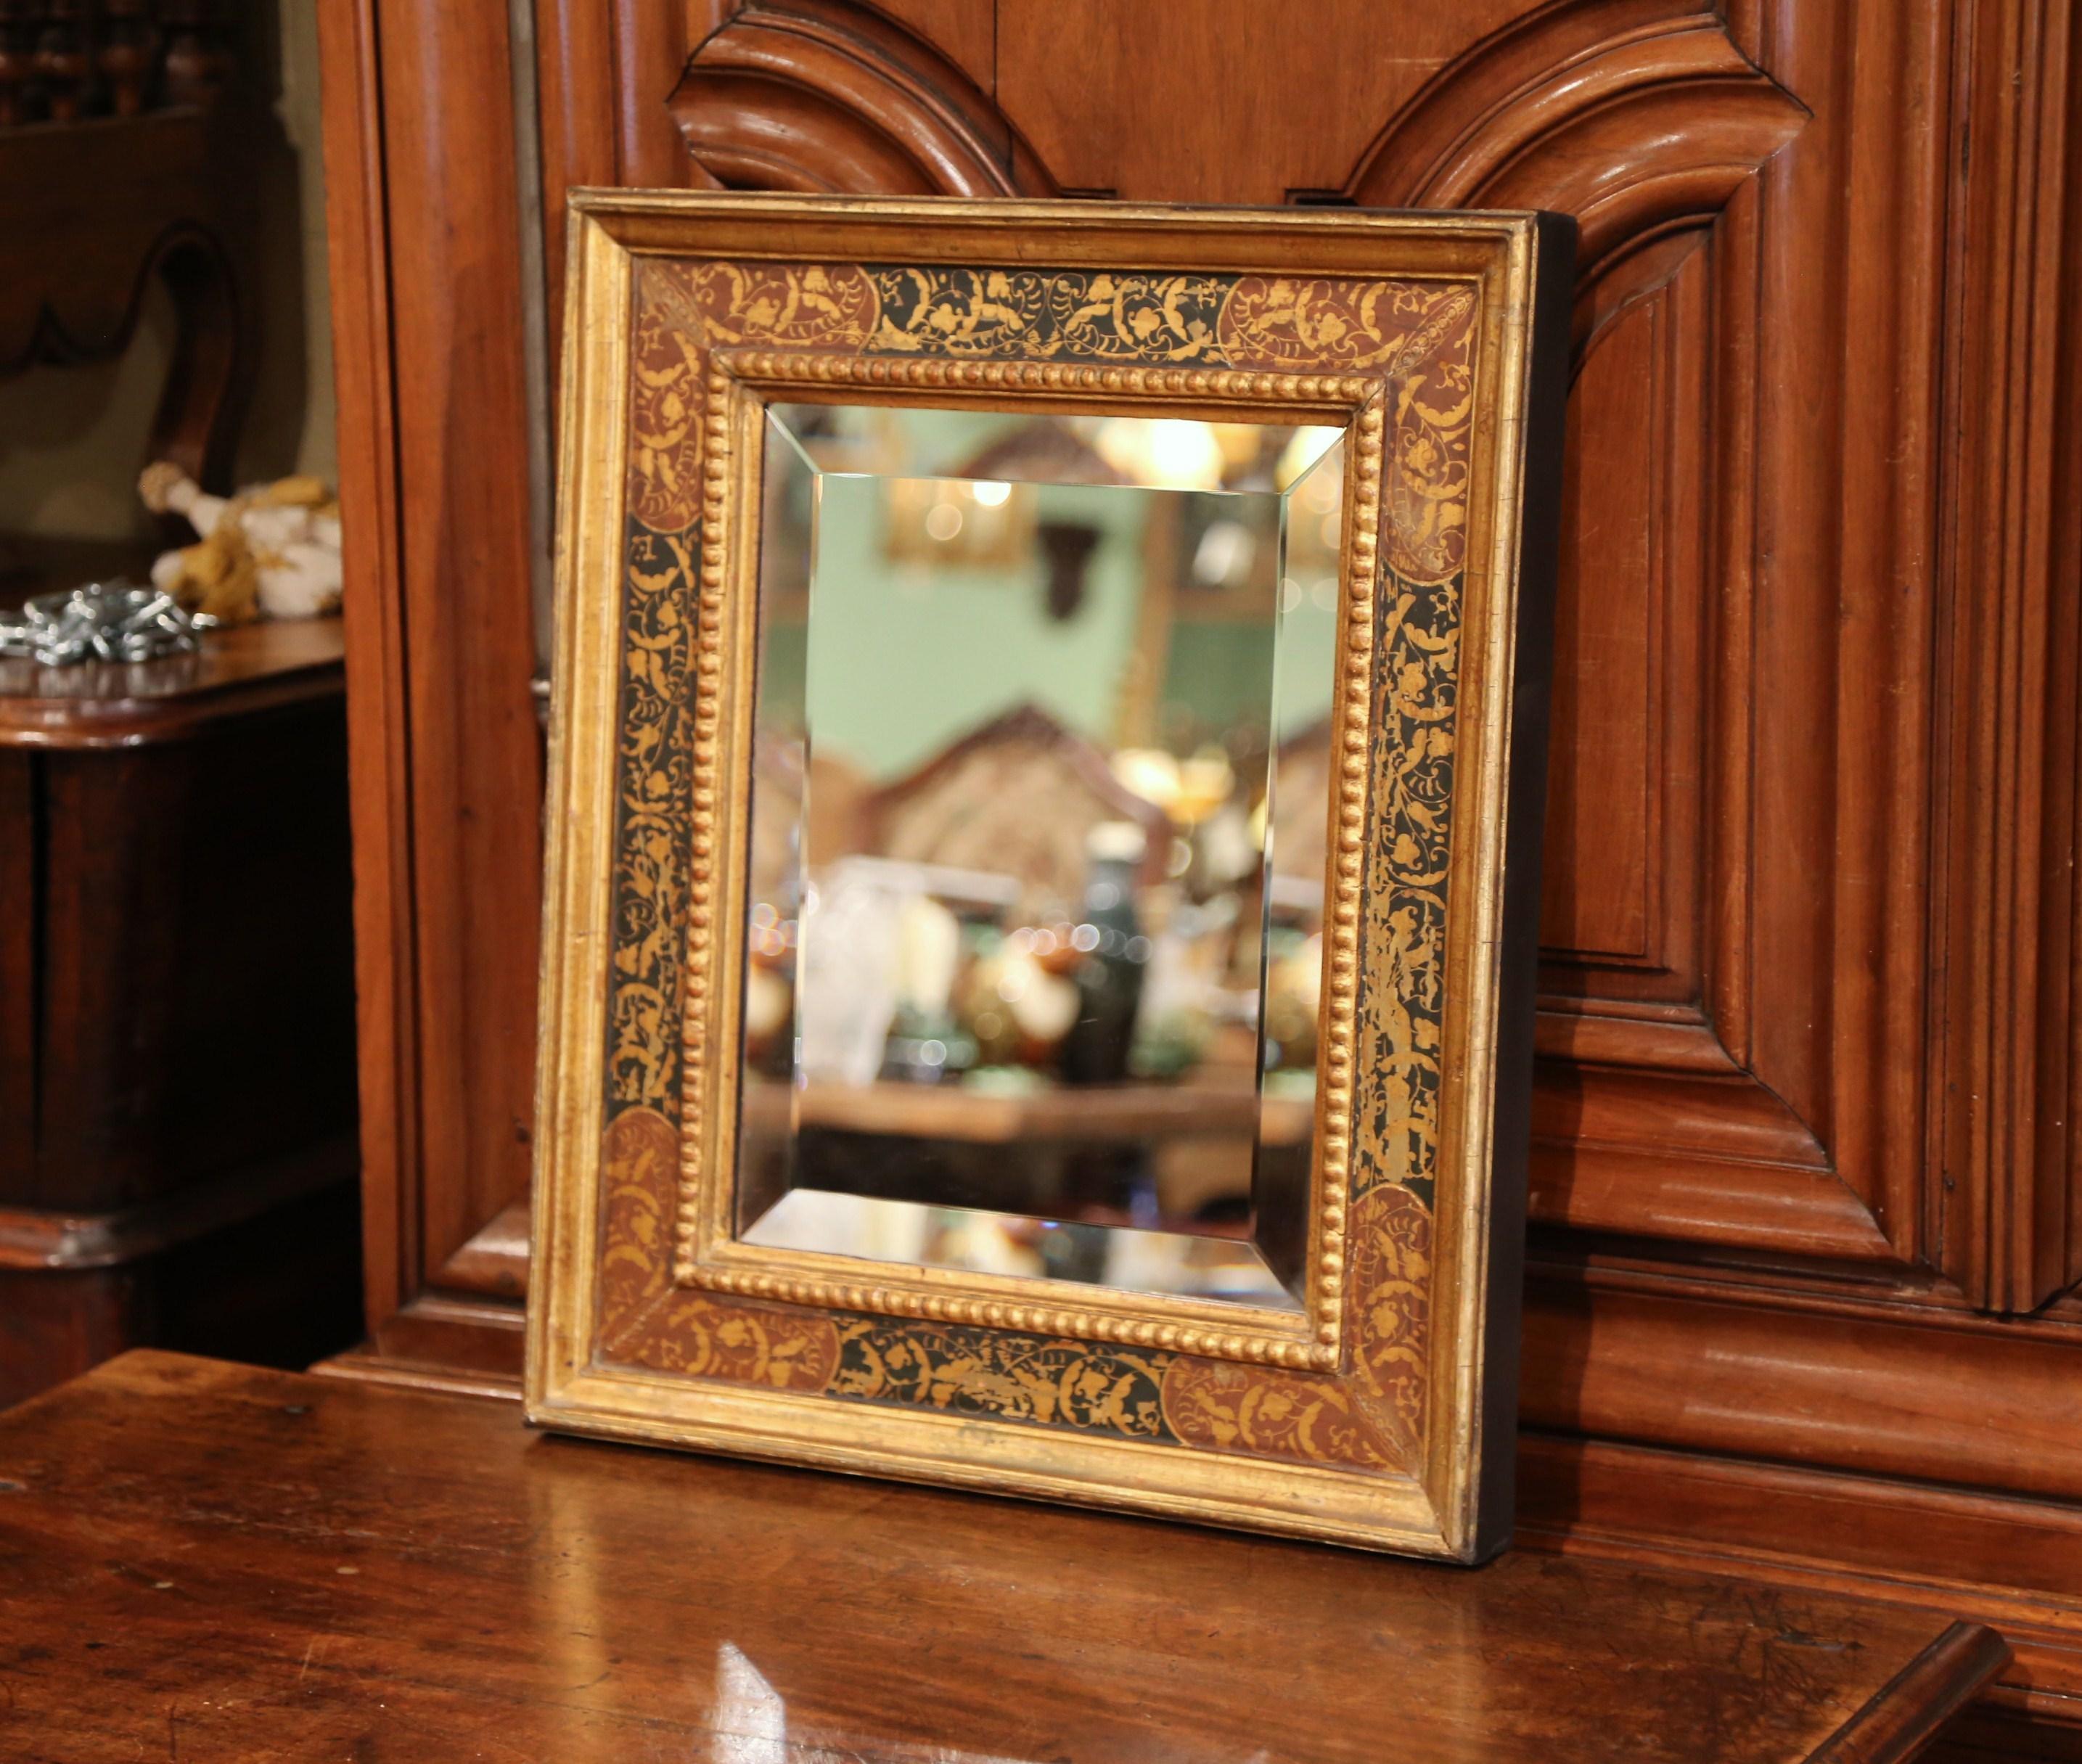 Decorate a room or hallway with this ornate, antique mirror. Carved and painted in Italy circa 1920, the dramatic, Italian rectangular mirror features colorful, hand painted floral and foliage decor around the frame. The elegant frame is decorated